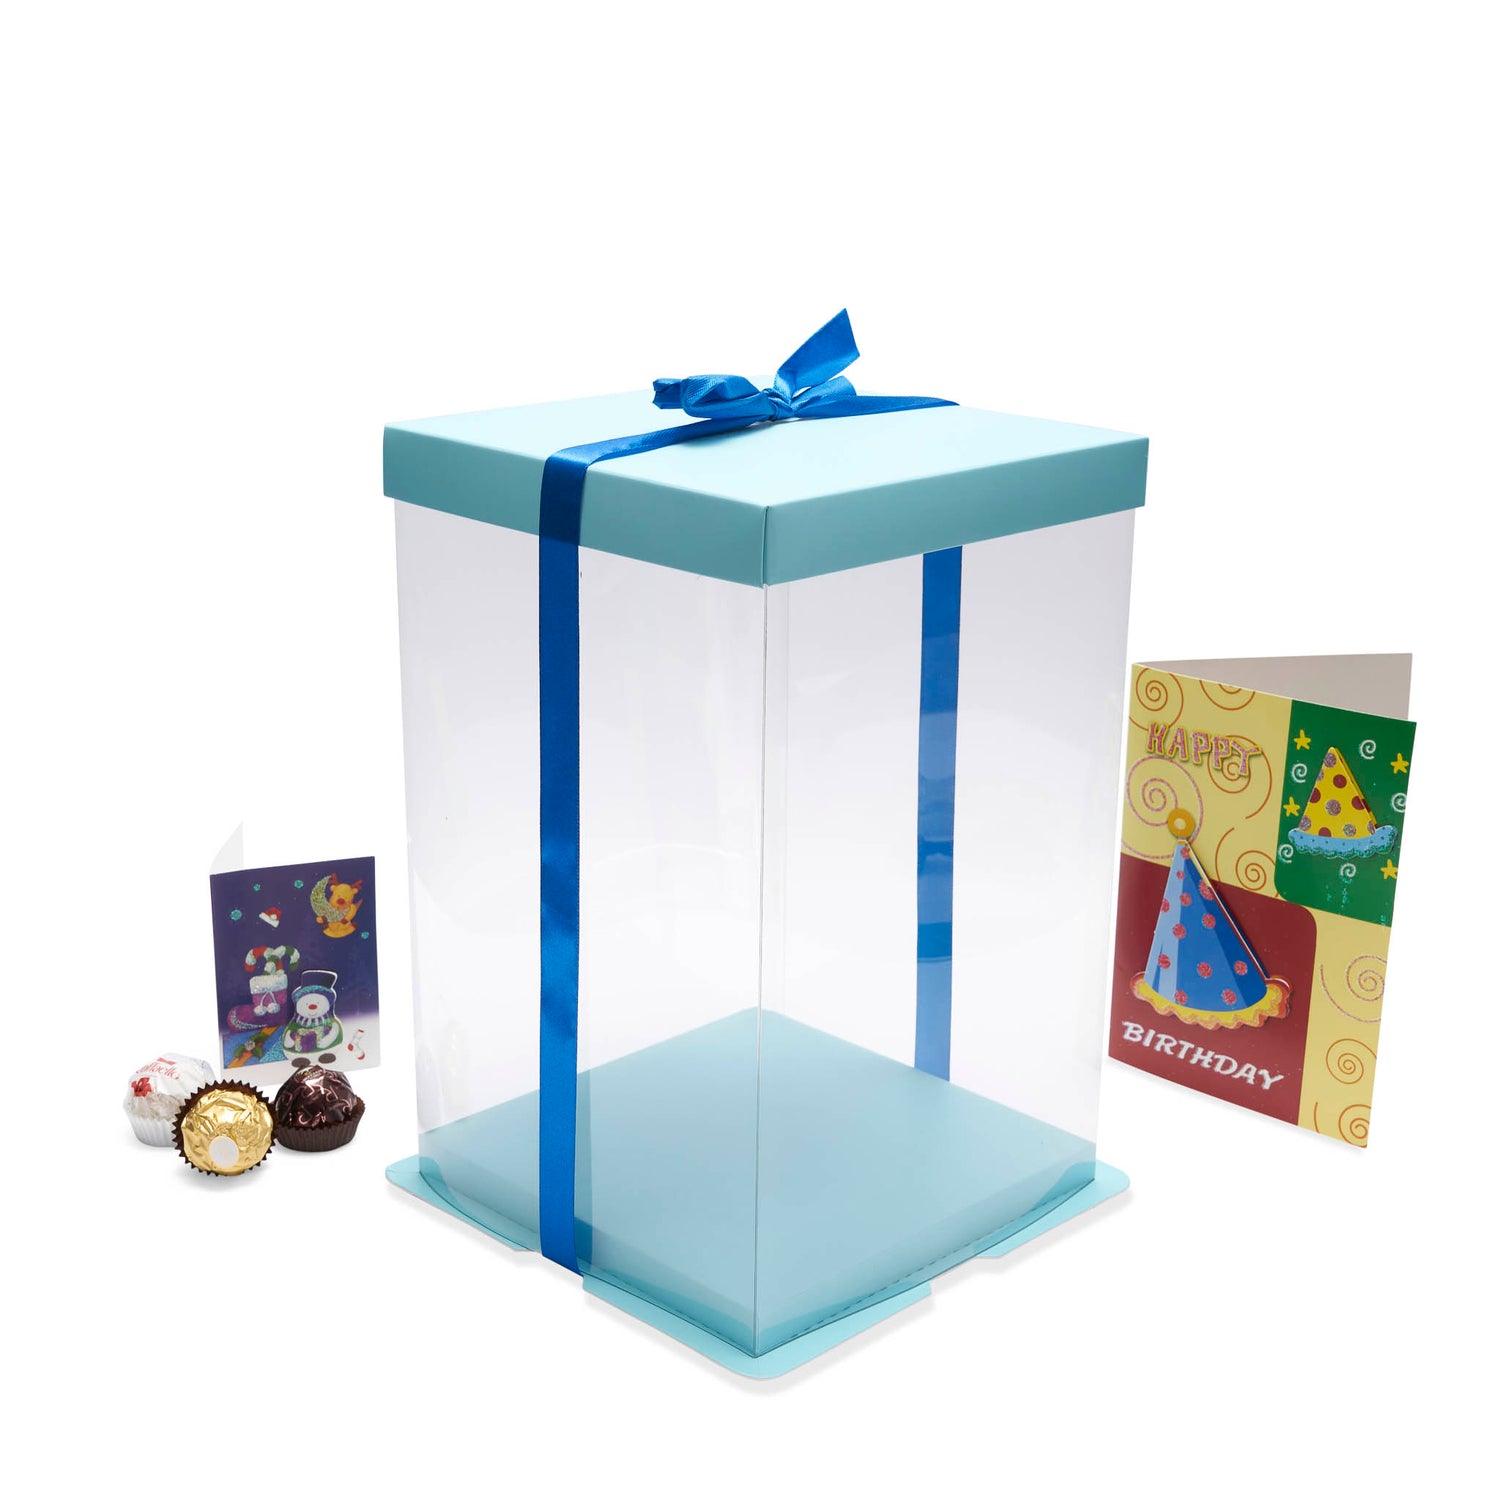 Round Cake Boxes With Blue Ribbon